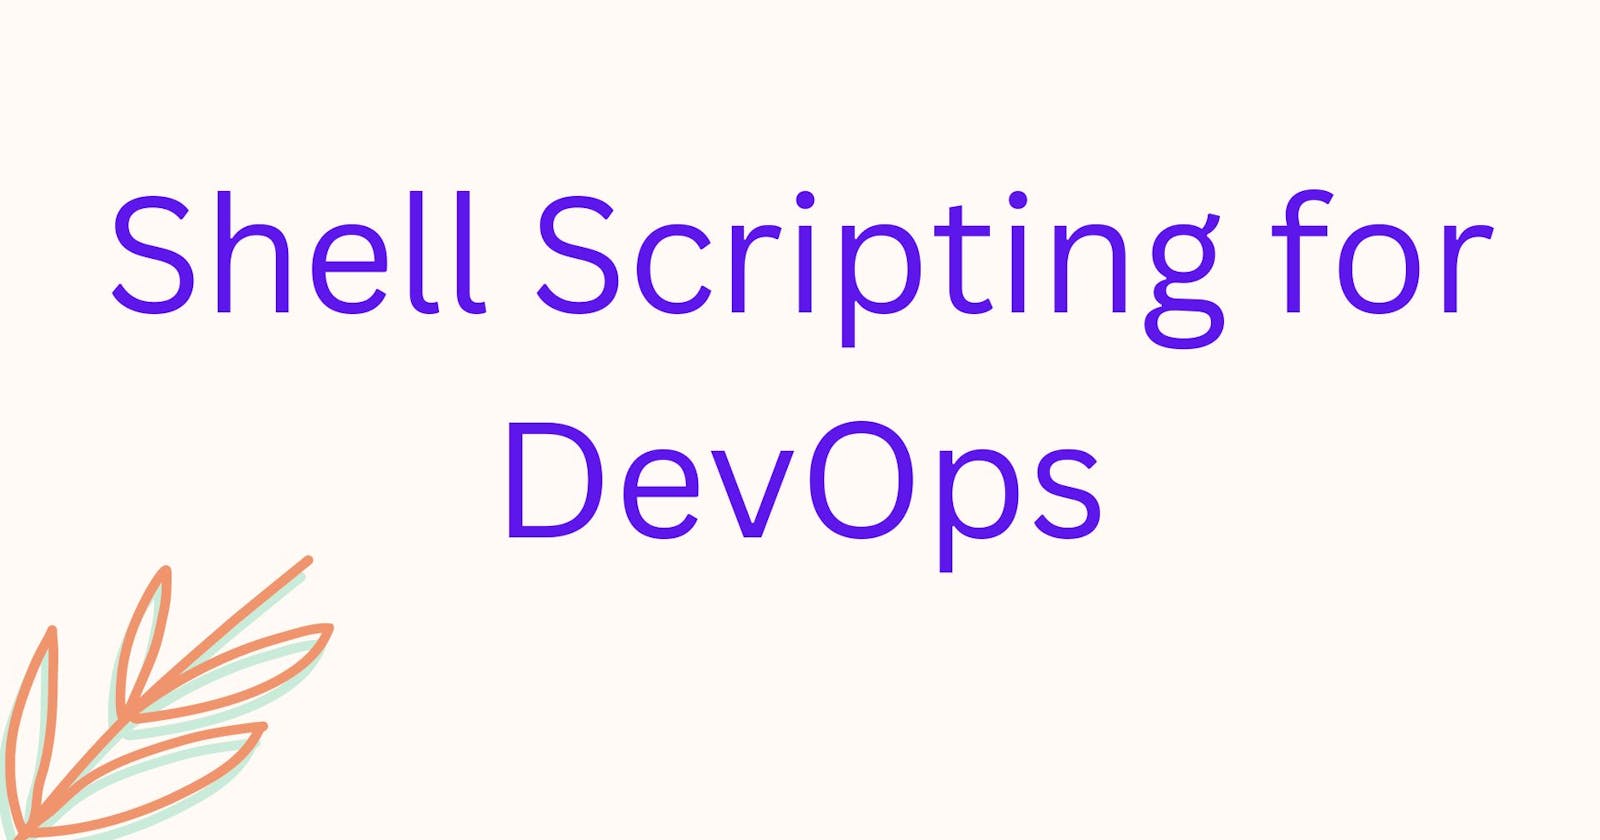 What & why Shell Scripting?